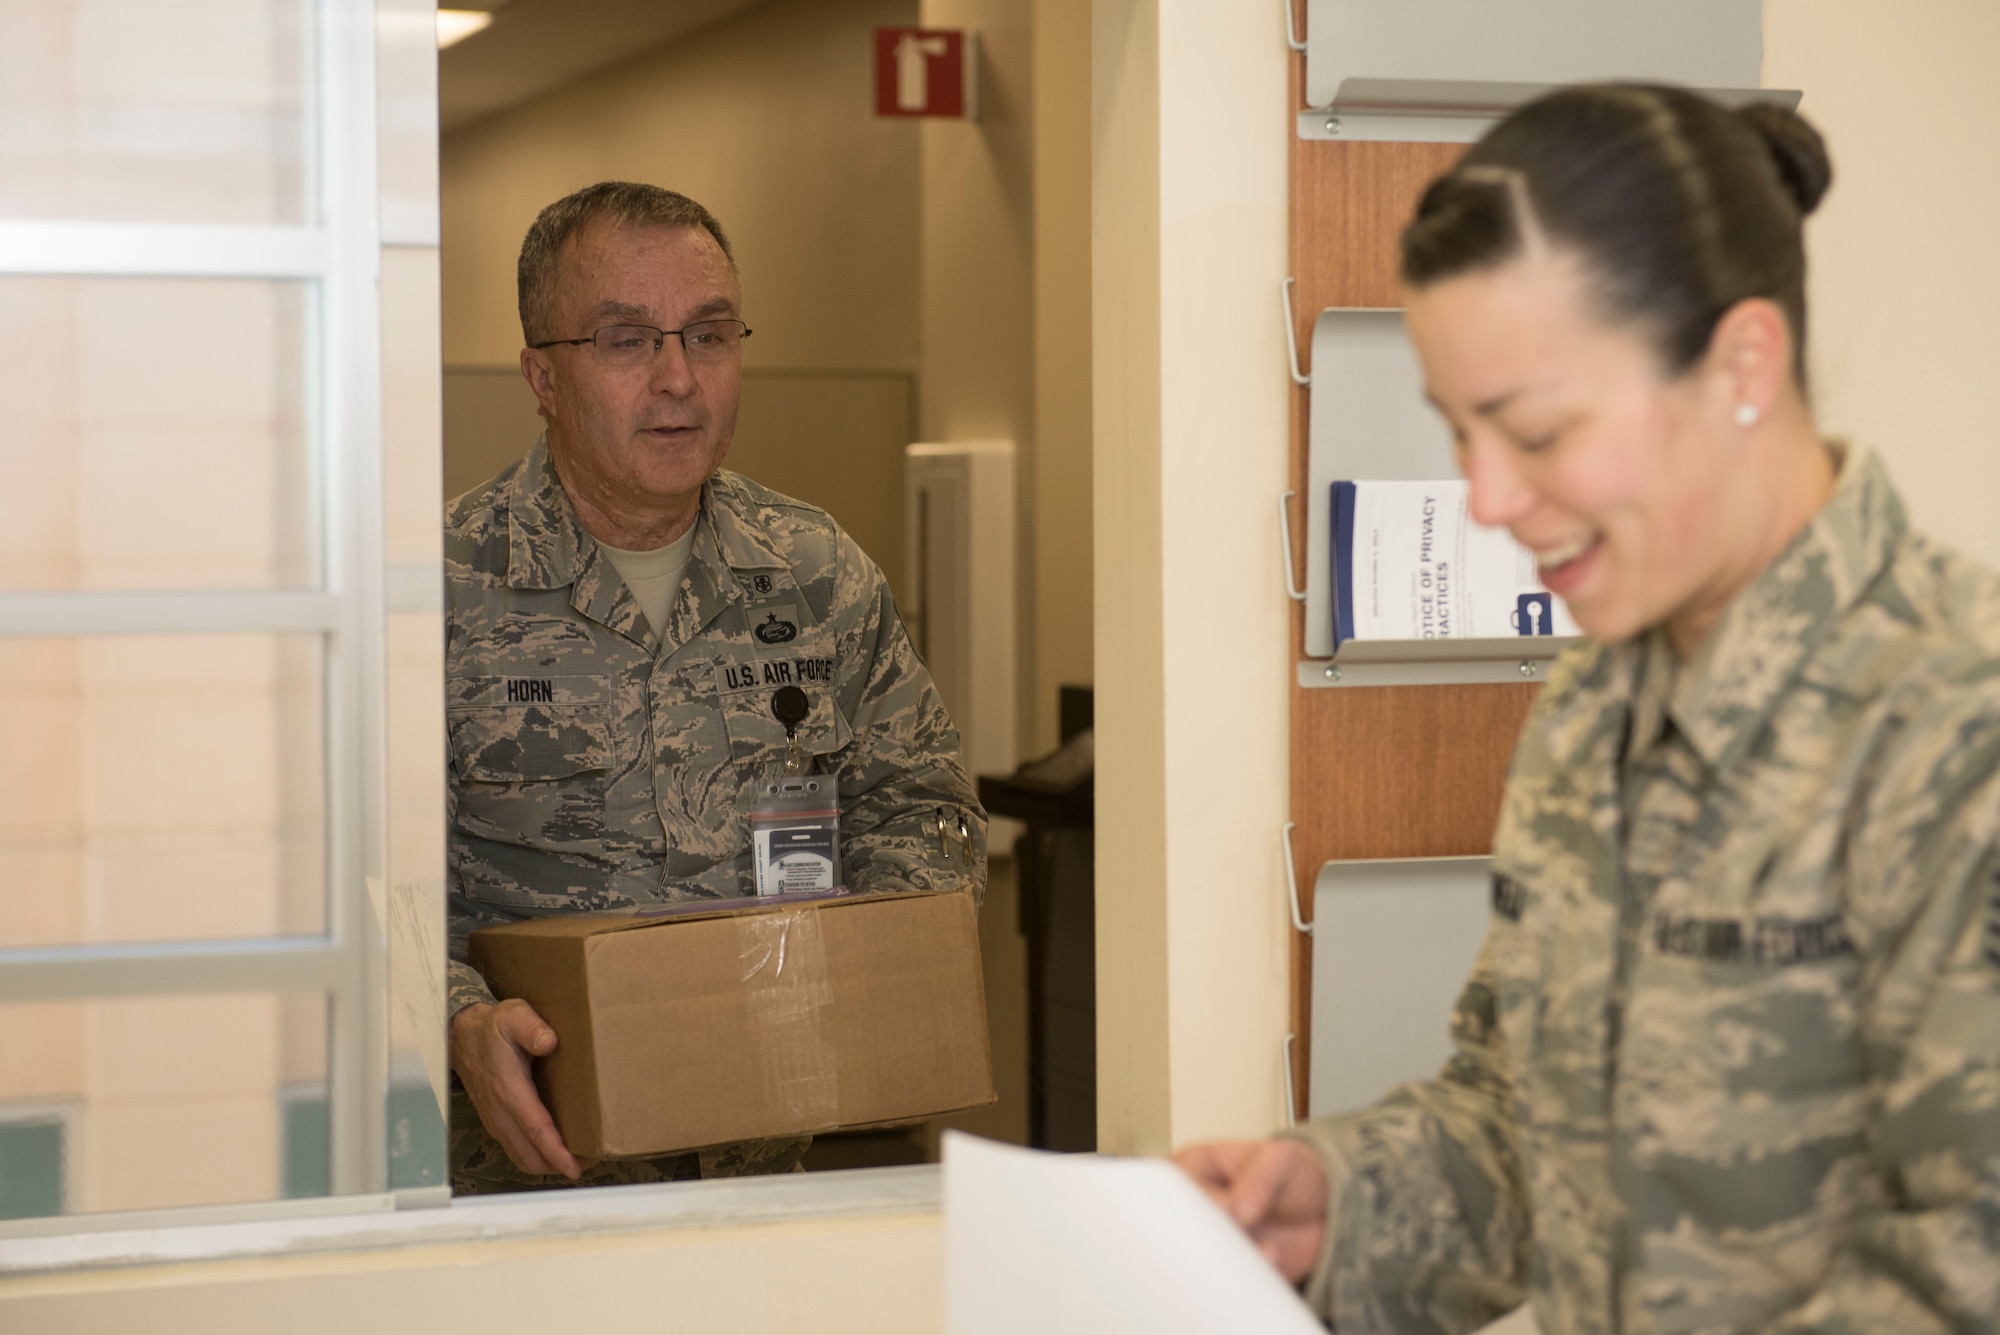 U.S. Air Force Tech. Sgt. Kenneth Horn, 20th Medical Support Squadron (MDSS) outpatient record noncommissioned officer in charge (NCOIC), left, thanks Staff Sgt. Melanie Bedwell, 20th MDSS storage and distribution NCOIC, after receiving his shop’s supplies at Shaw Air Force Base, S.C., Jan. 31, 2018.